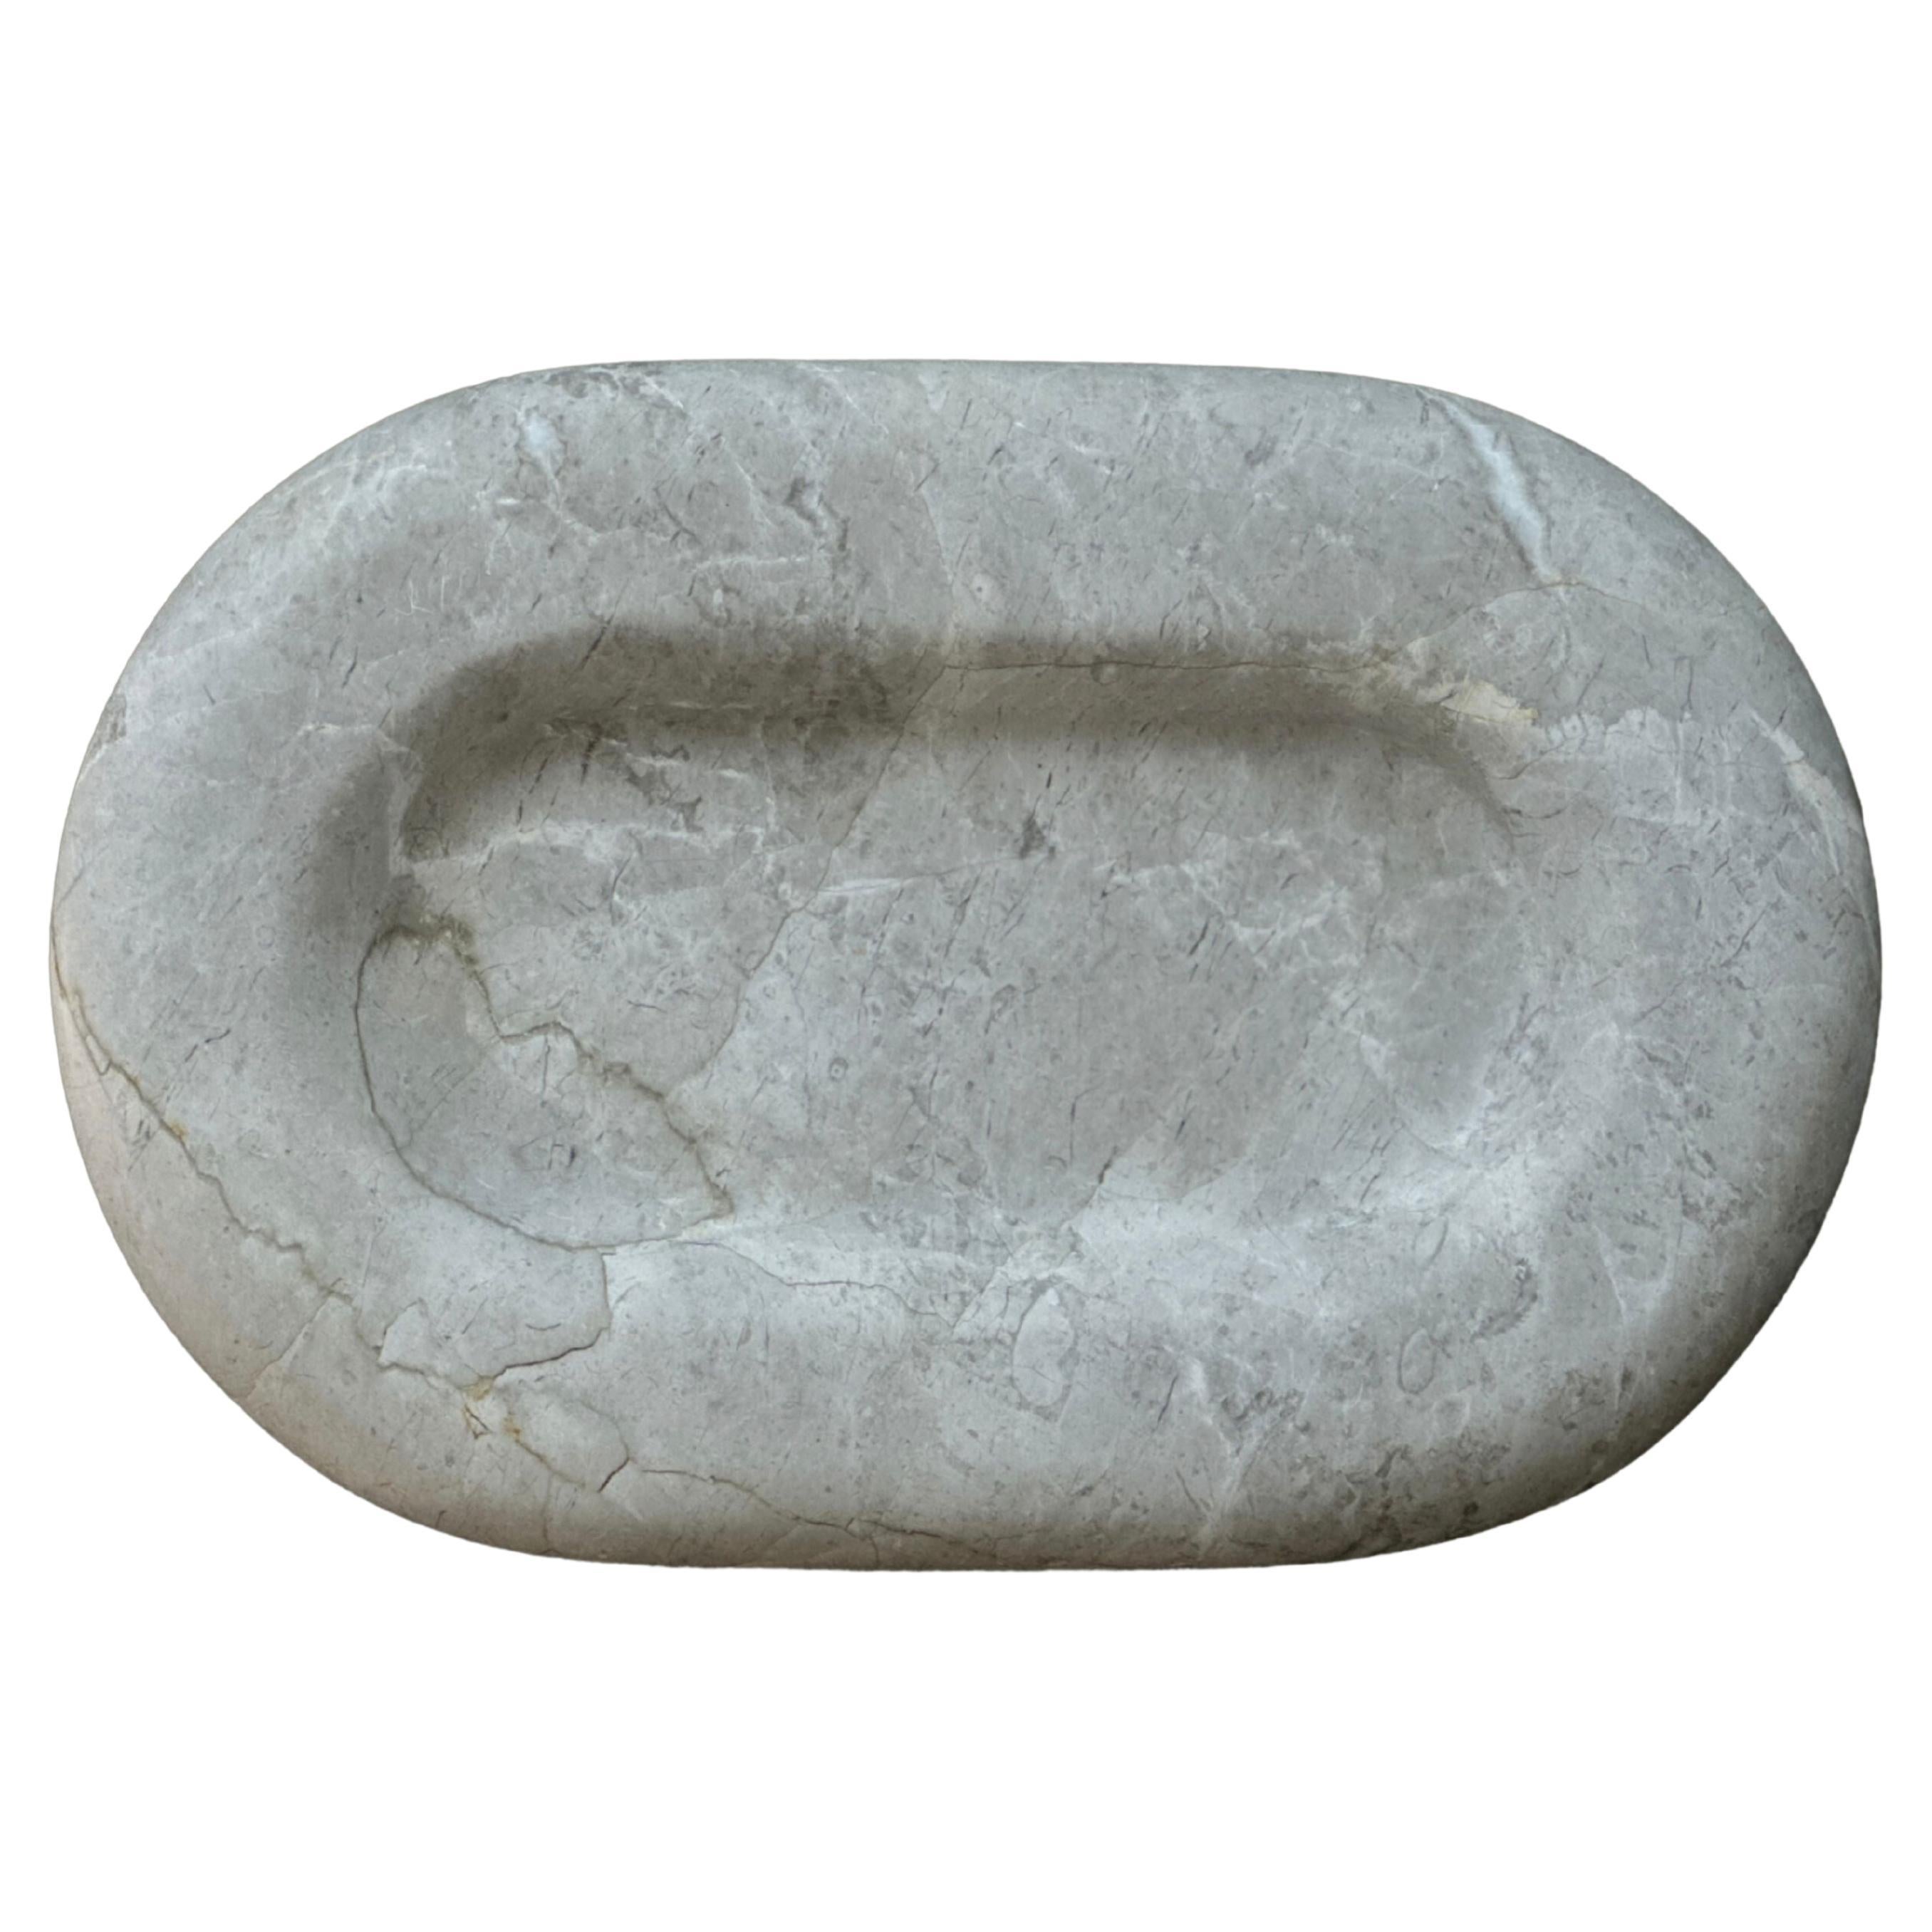 Maddi Catch: Puffed Border Tray in Oyster Marble by Anastasio Home